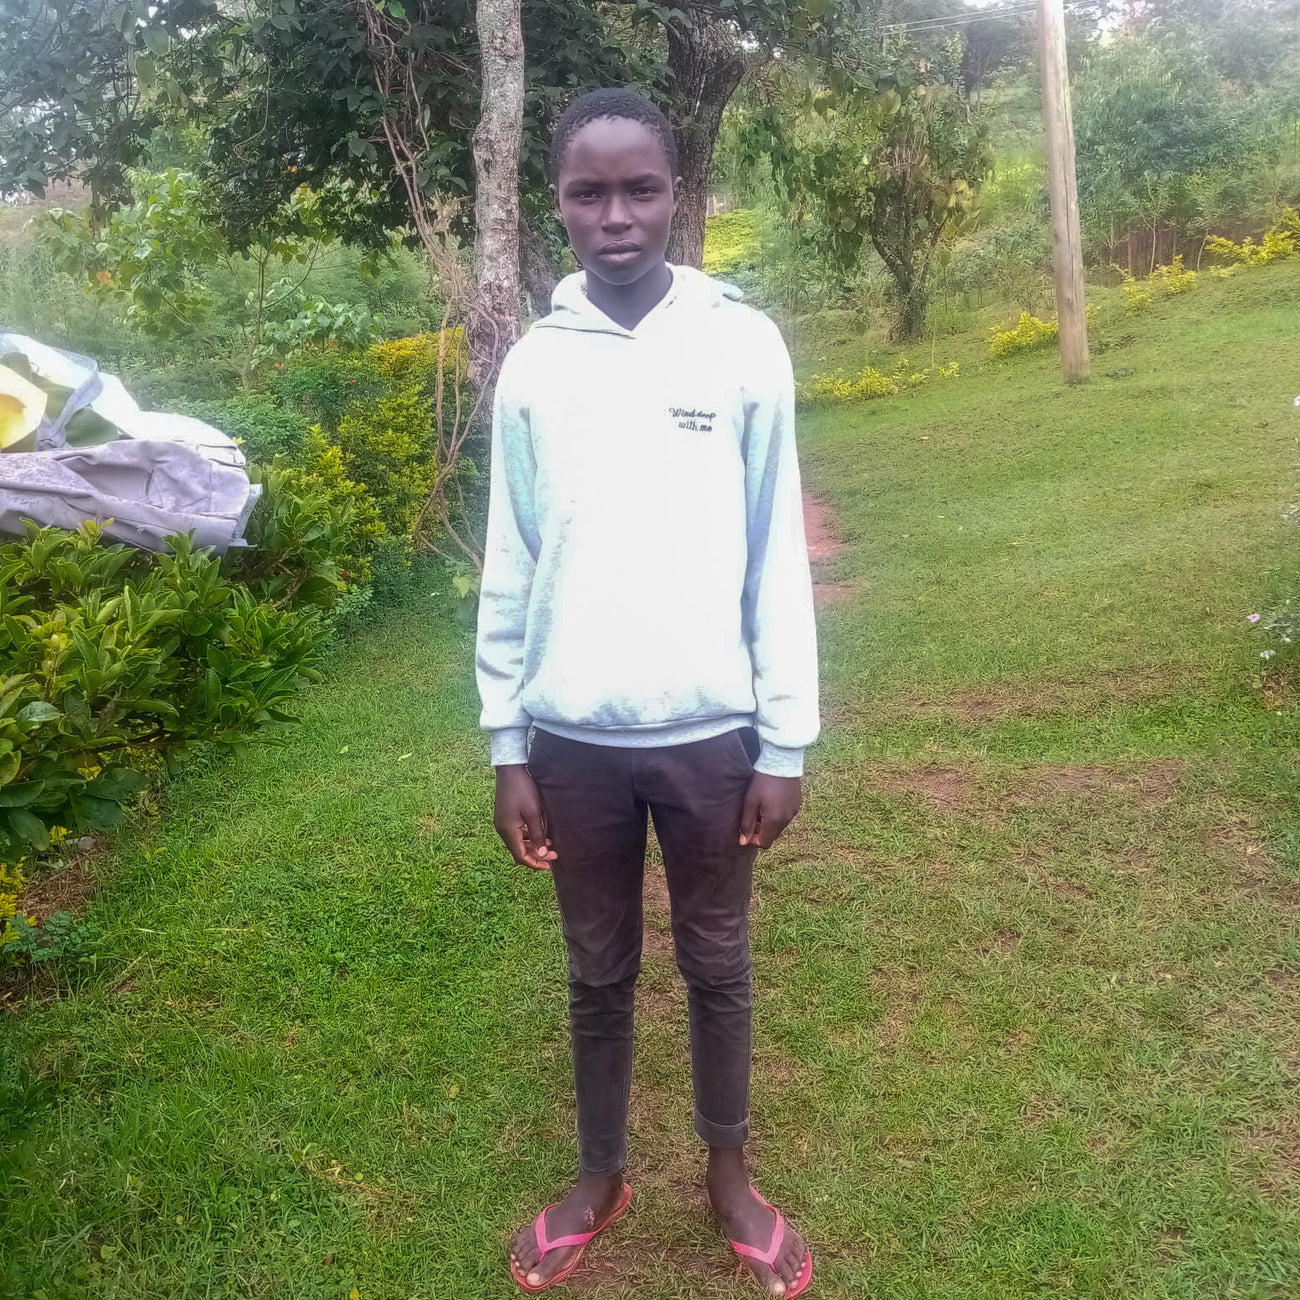 Introducing Amon Limo Kipkoech: Our 2nd Seed a Future Scholarship Recipient!